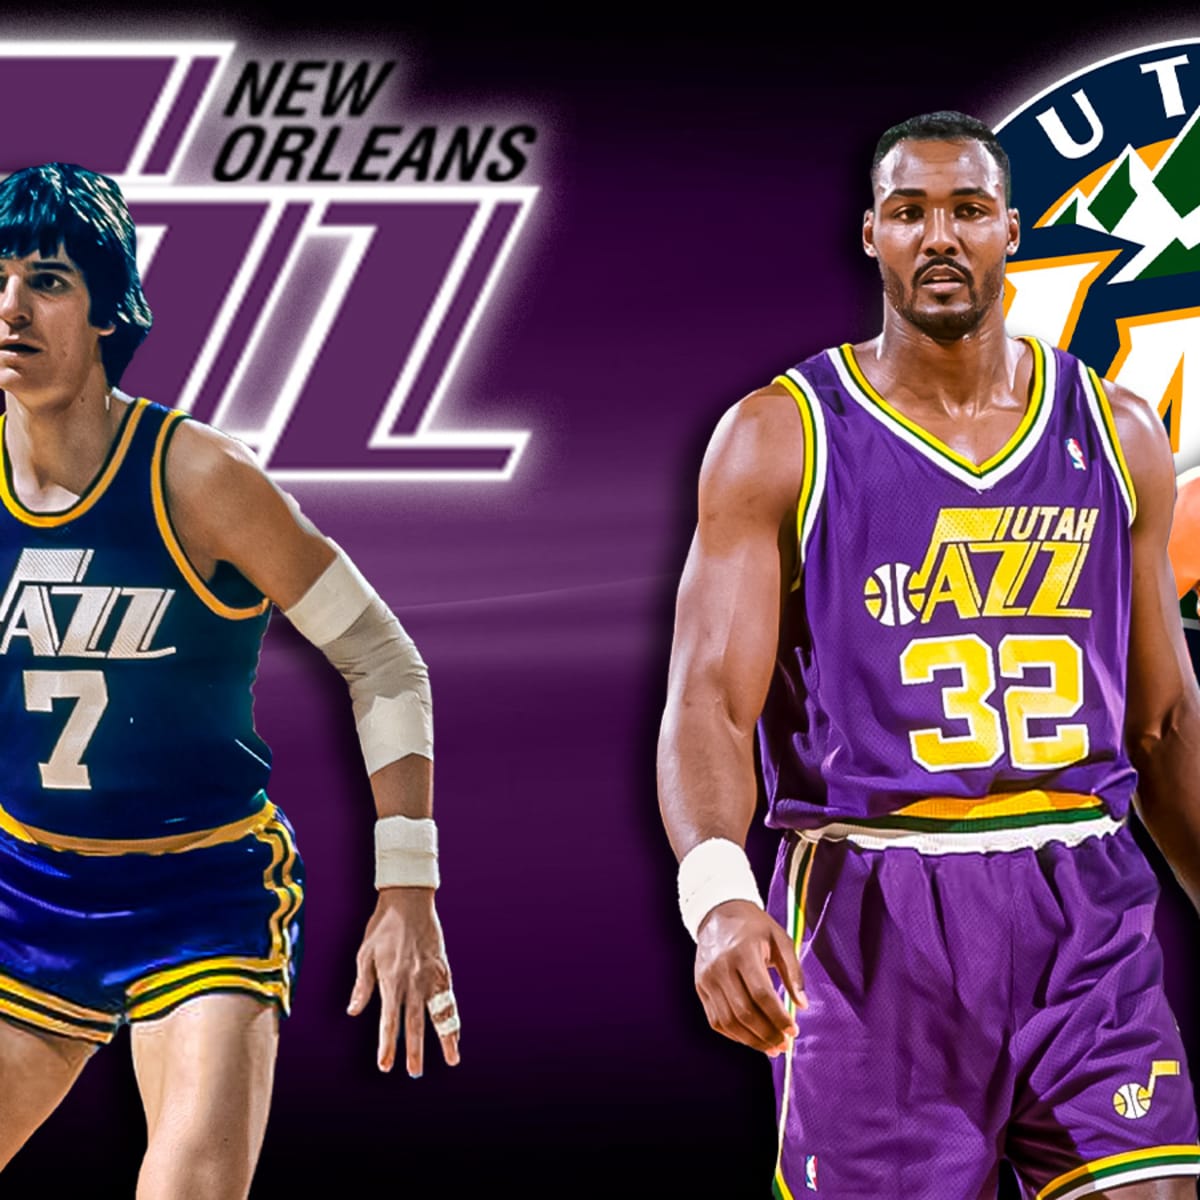 The story of the New Orleans Jazz and their move to Utah, where